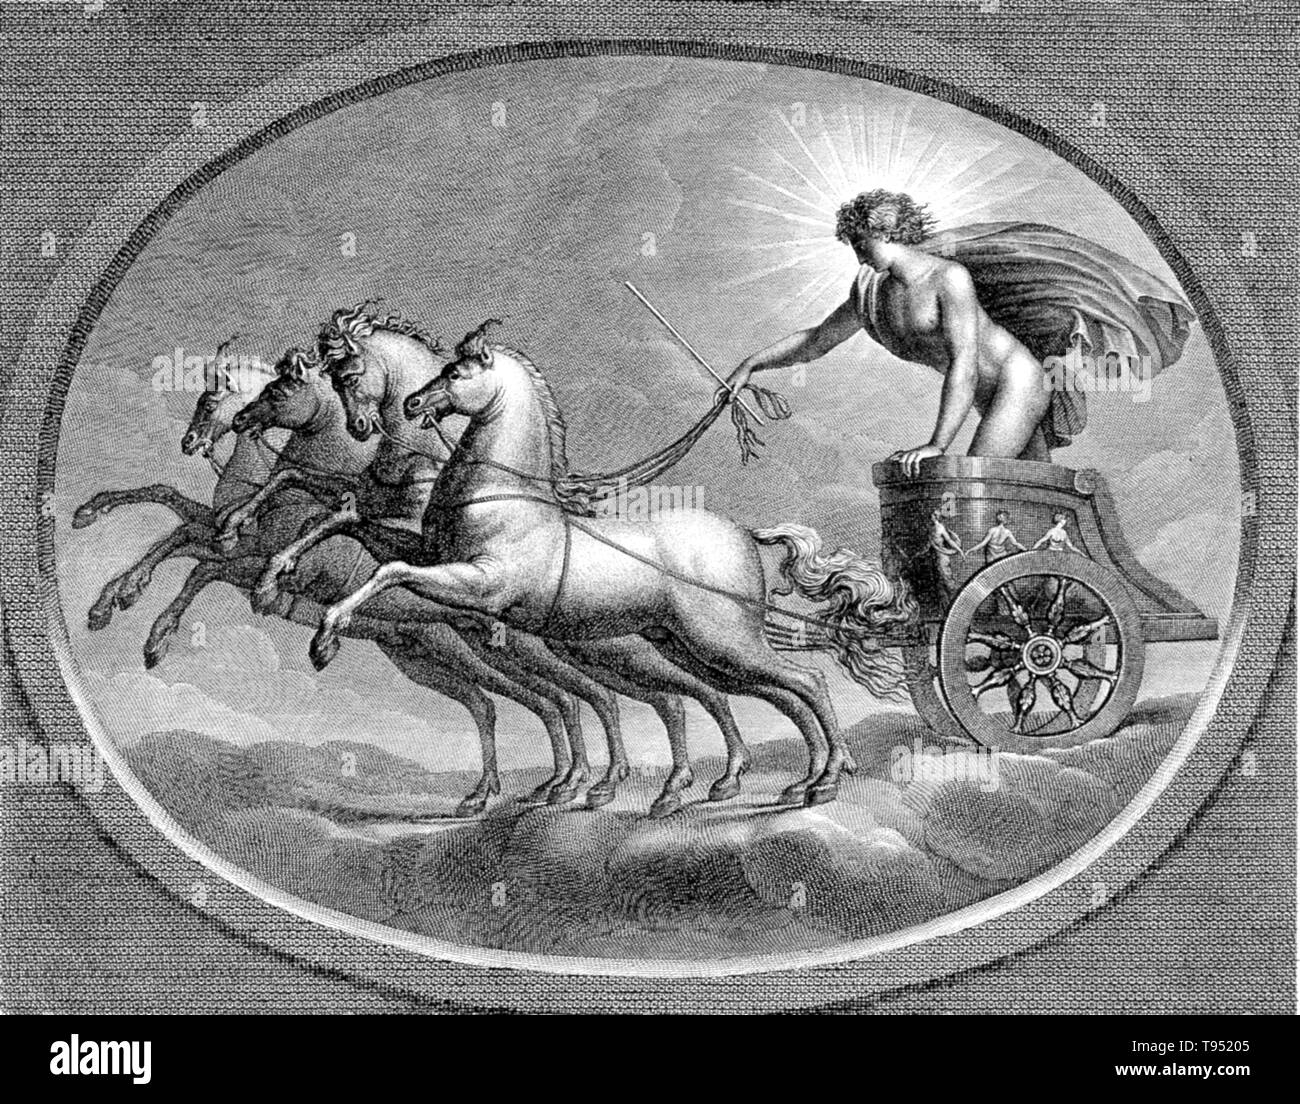 Sol in his chariot, riding across the heavens. Sol was the solar deity in Ancient Roman religion. It was long thought that Rome actually had two different, consecutive sun gods. The first, Sol Indiges, was thought to have been unimportant, disappearing altogether at an early period. Only in the late Roman Empire, scholars argued, did solar cult re-appear with the arrival in Rome of the Syrian Sol Invictus, perhaps under the influence of the Mithraic mysteries. Stock Photo